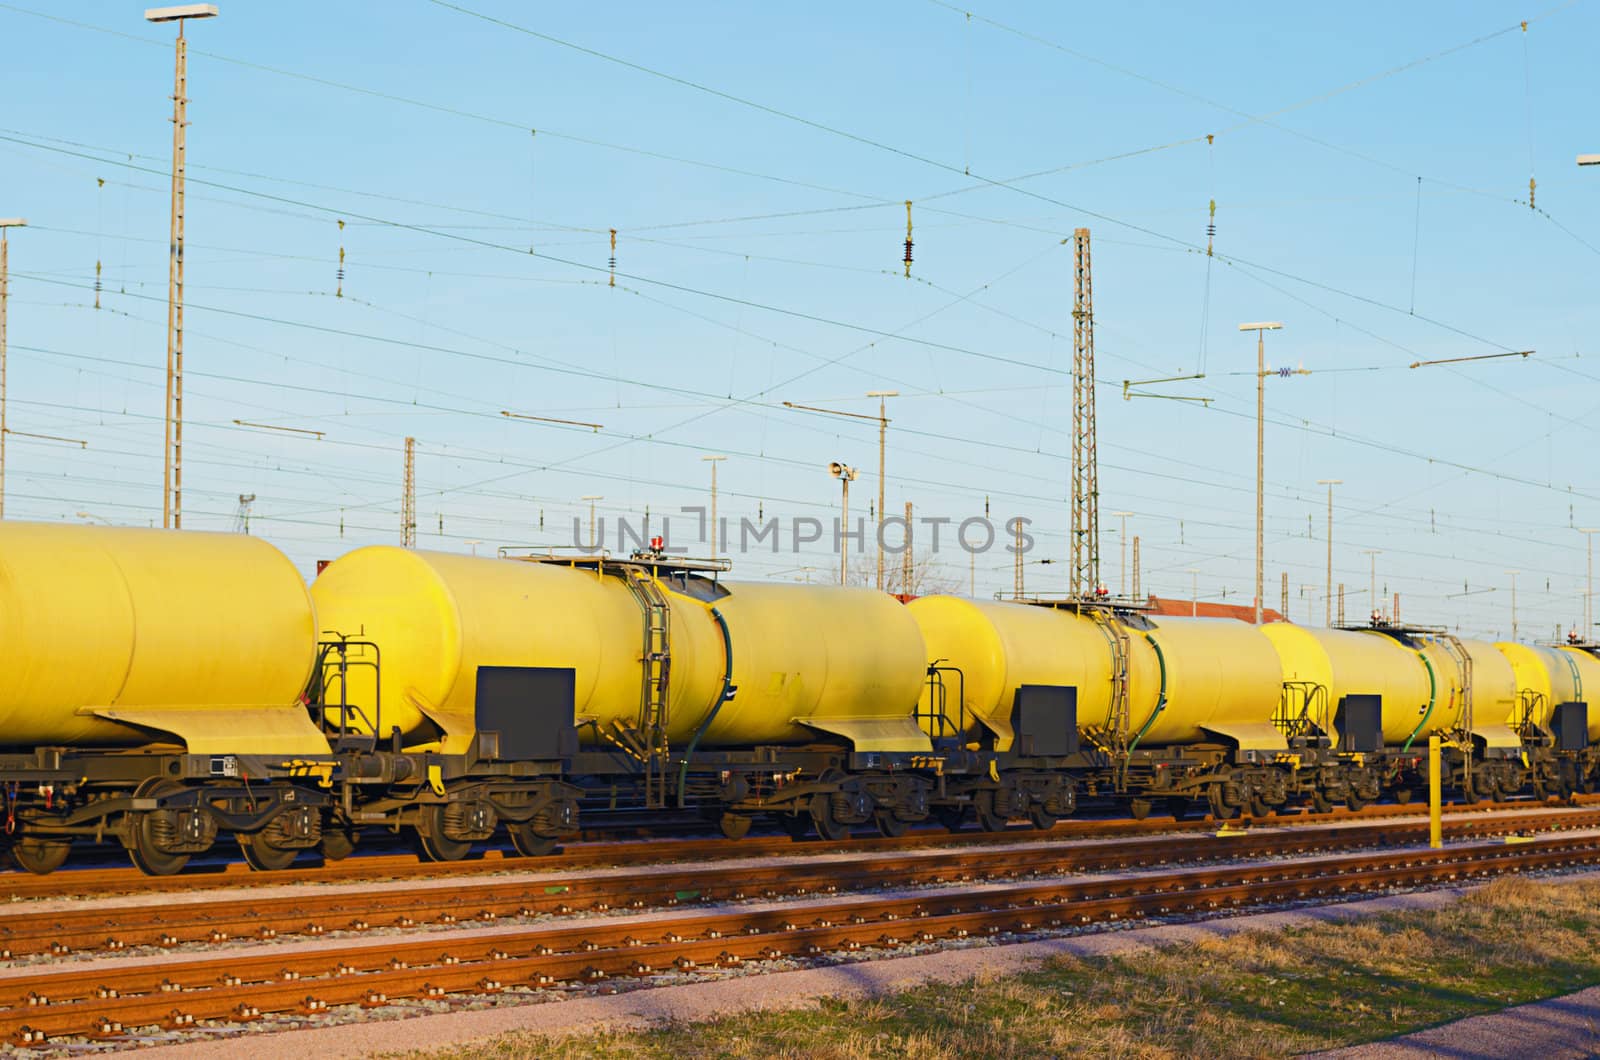 A yellow freight train on a freight yard.